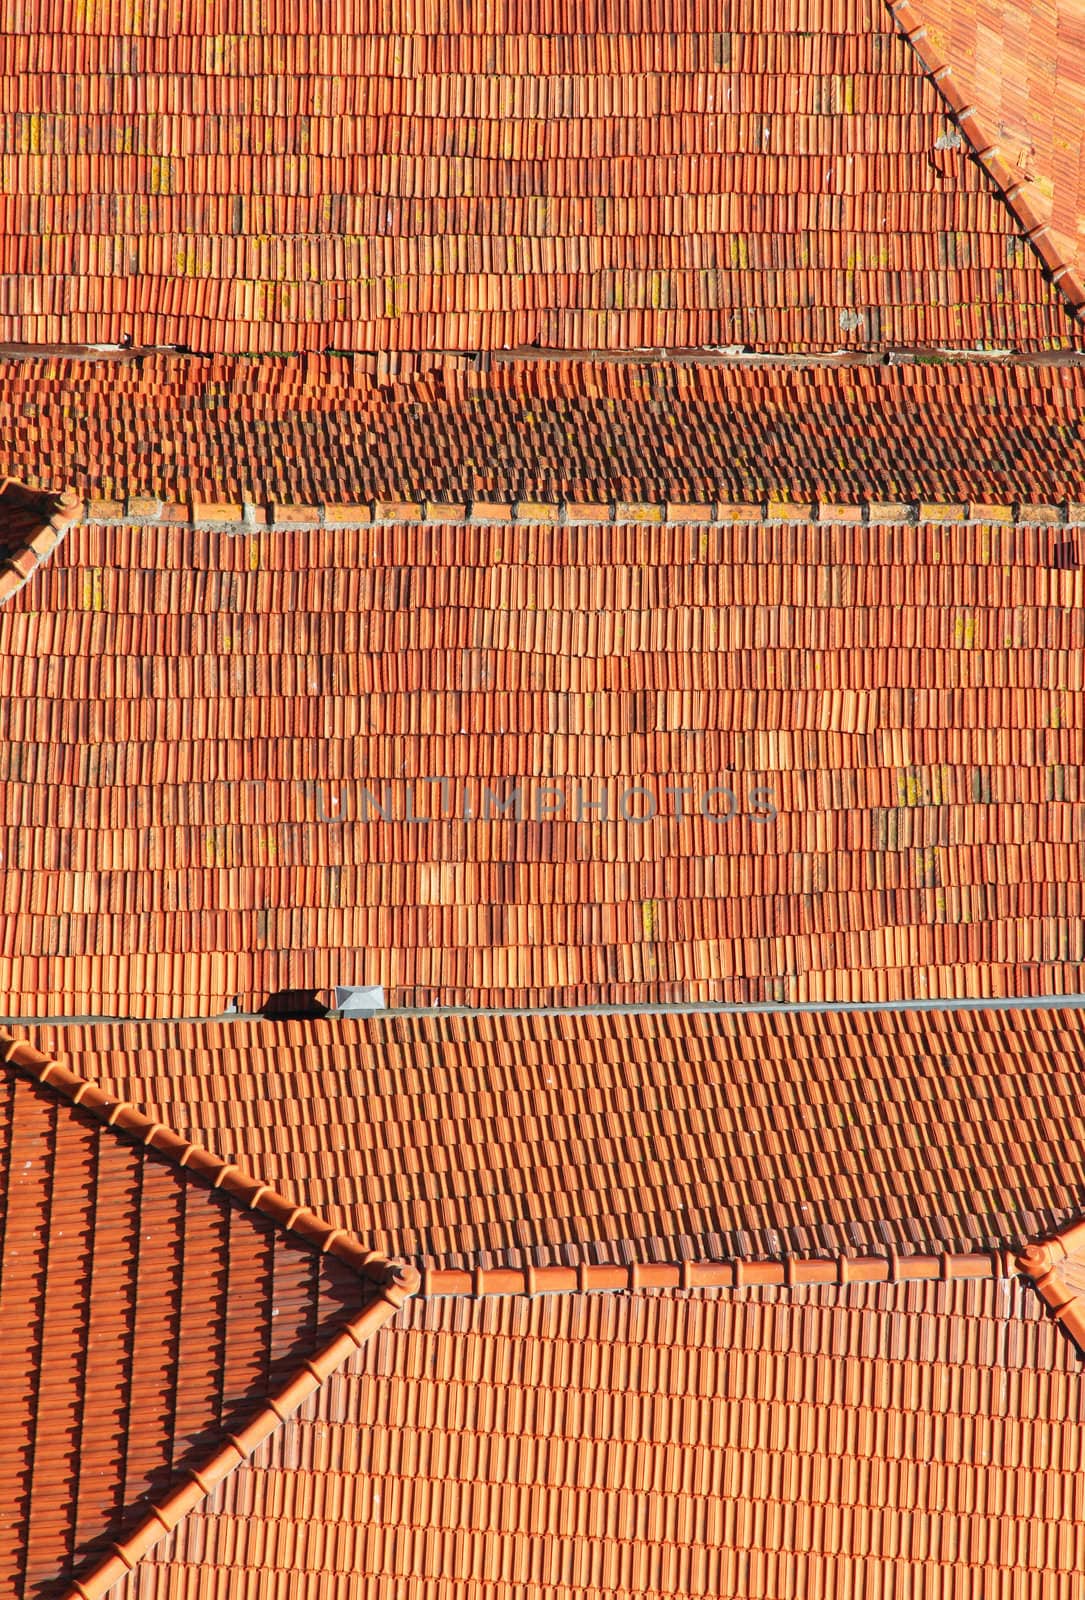 Portugal. Porto city. Old historical part of Porto. Roofs 